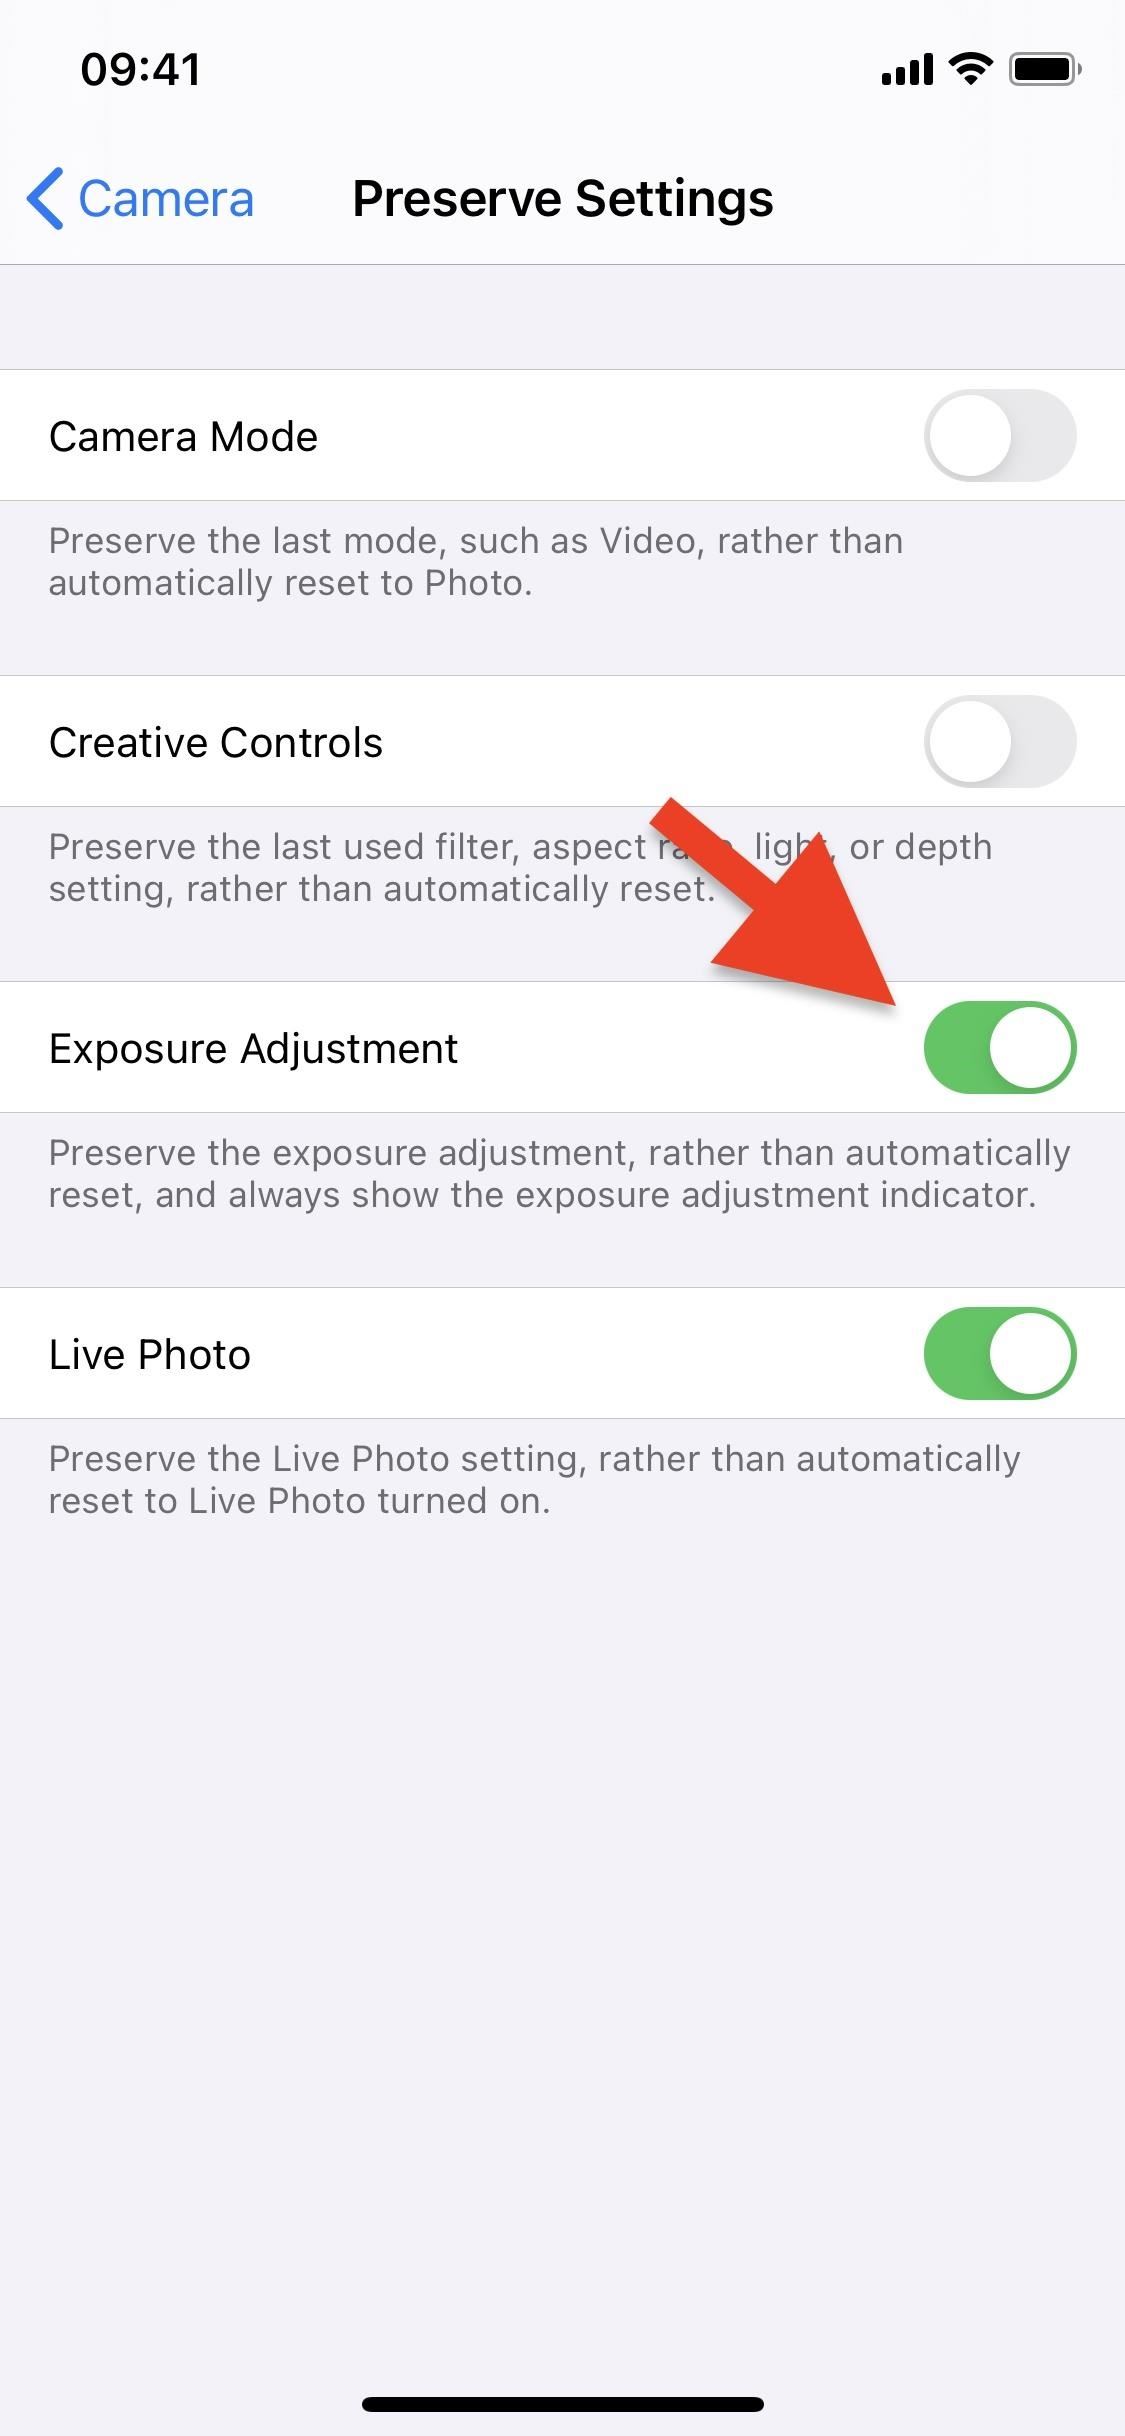 12 New Camera Features in iOS 14 That'll Make Your Photos & Videos Even Better